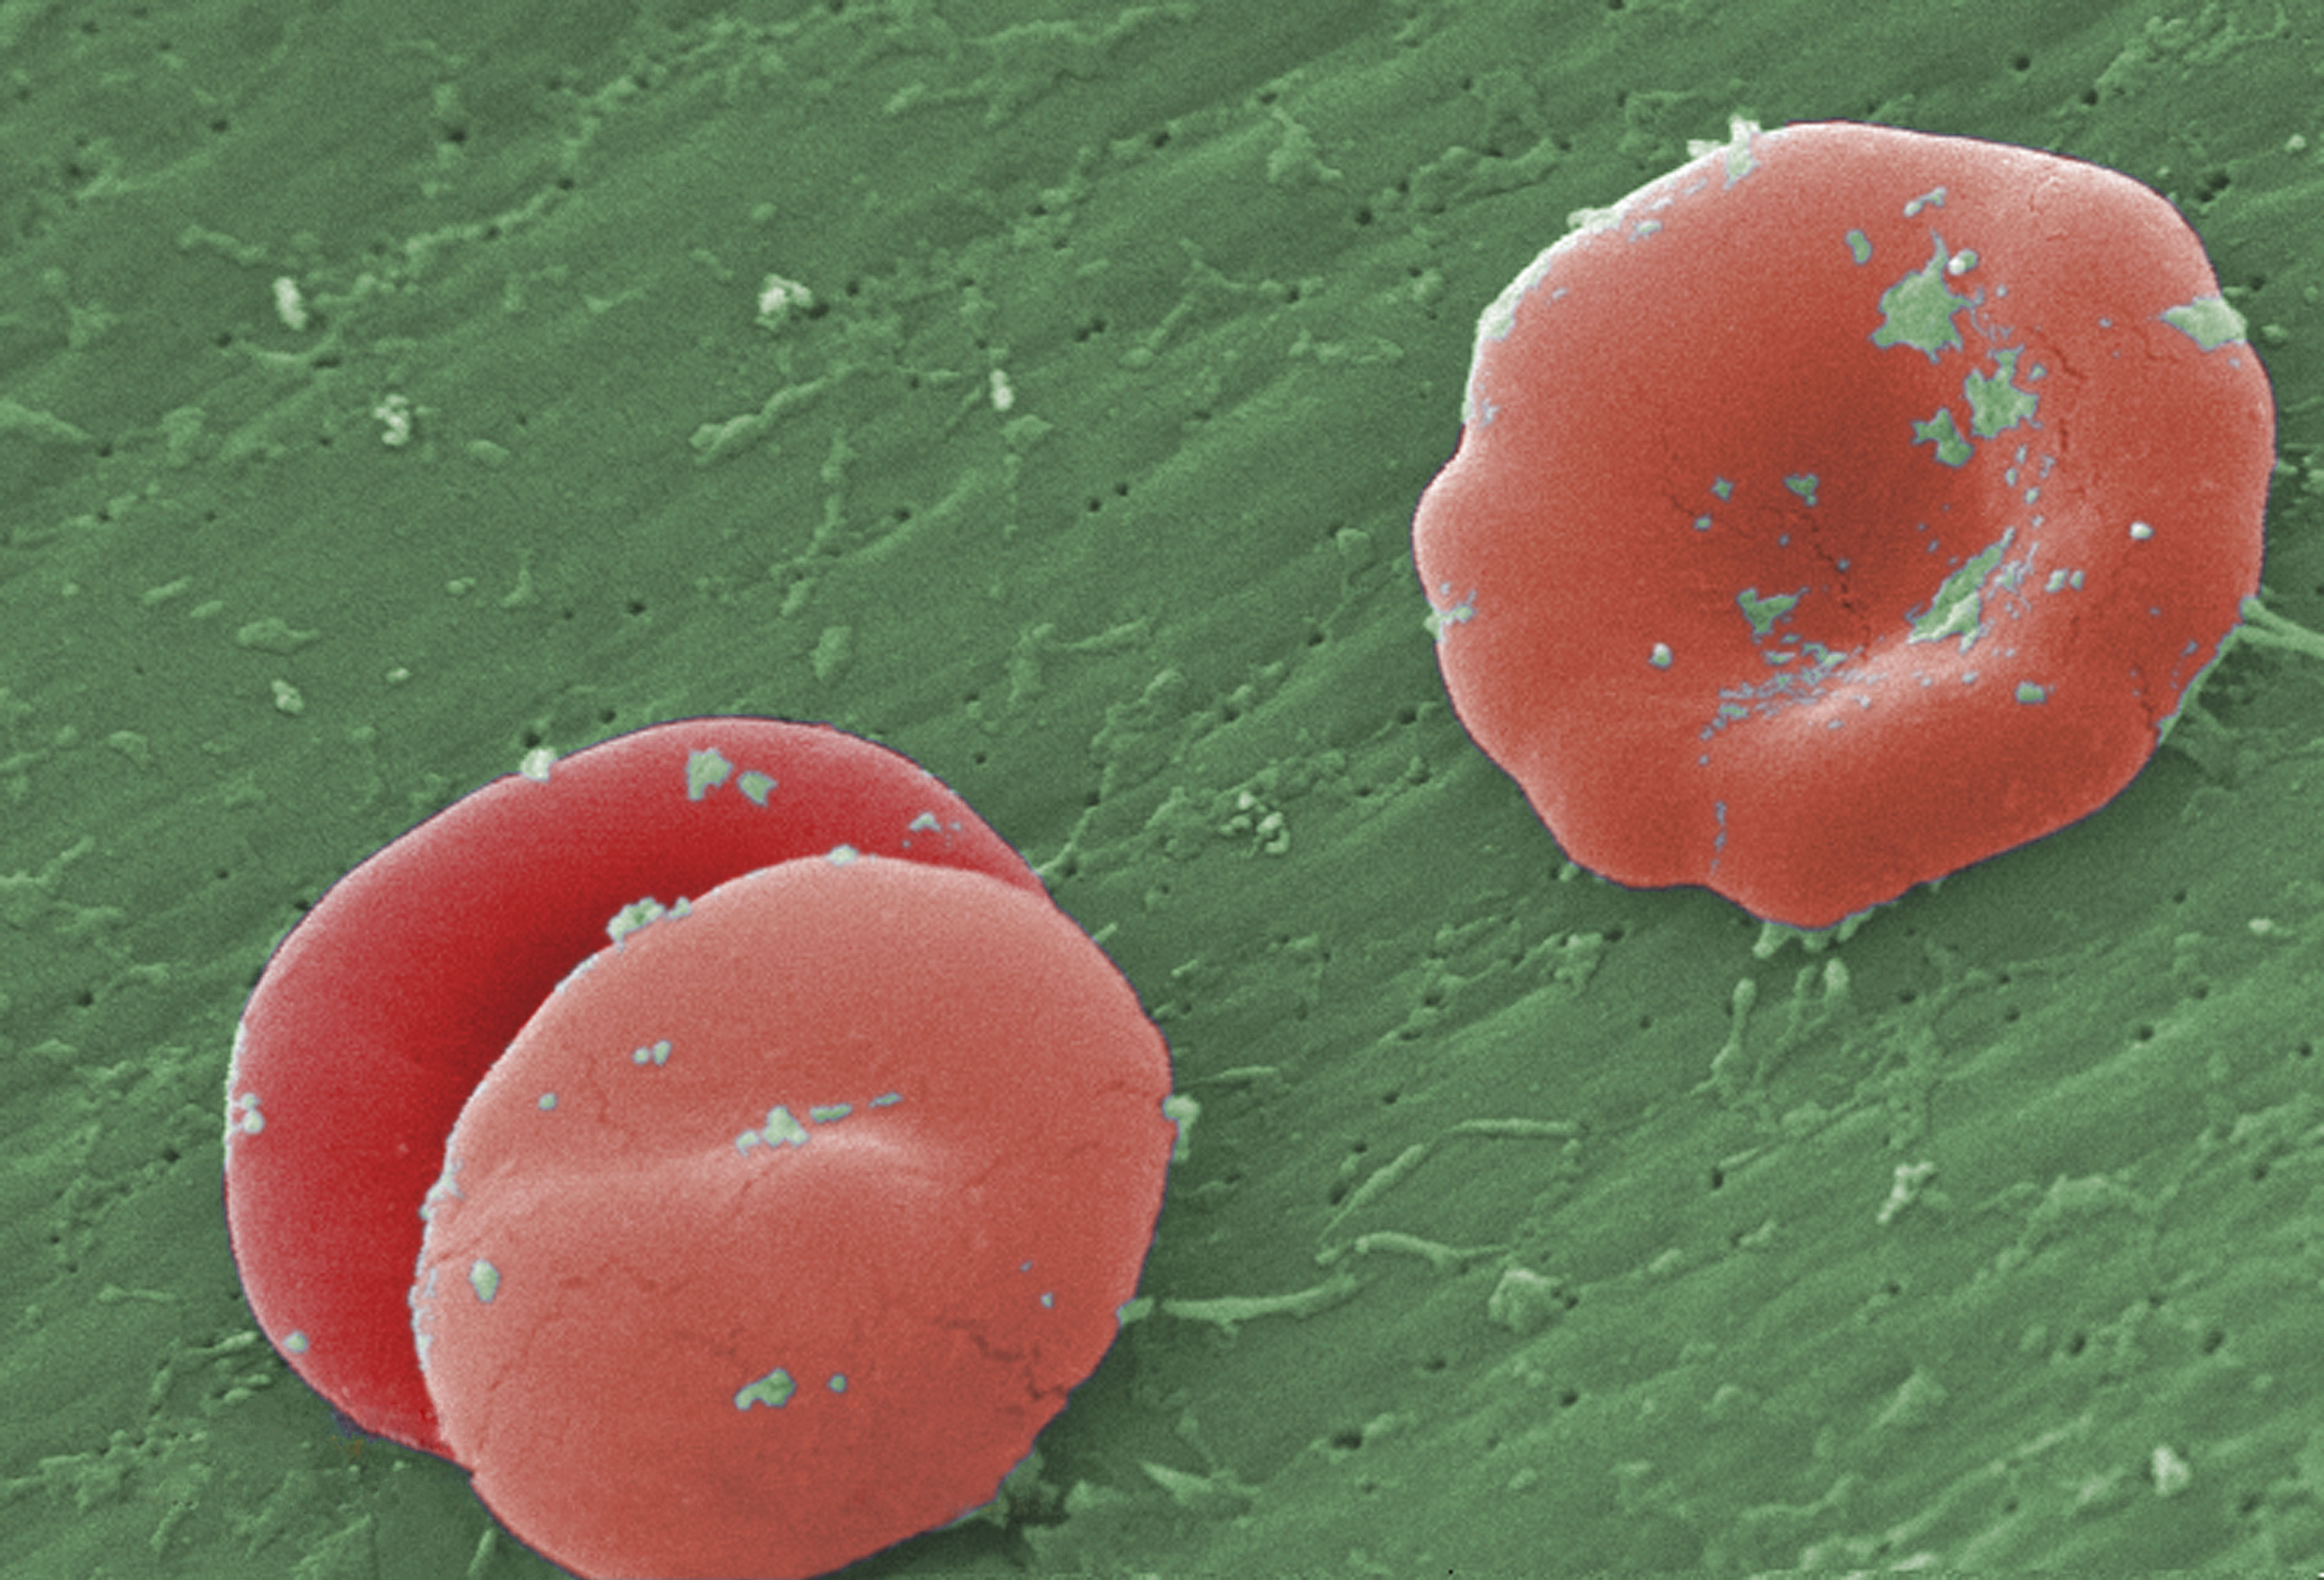 Under a high magnification of 8000X, this scanning electron micrograph reveals red blood cells in a 6-year-old male patient with sickle cell anemia. (Media for Medical—UIG/Getty Images)